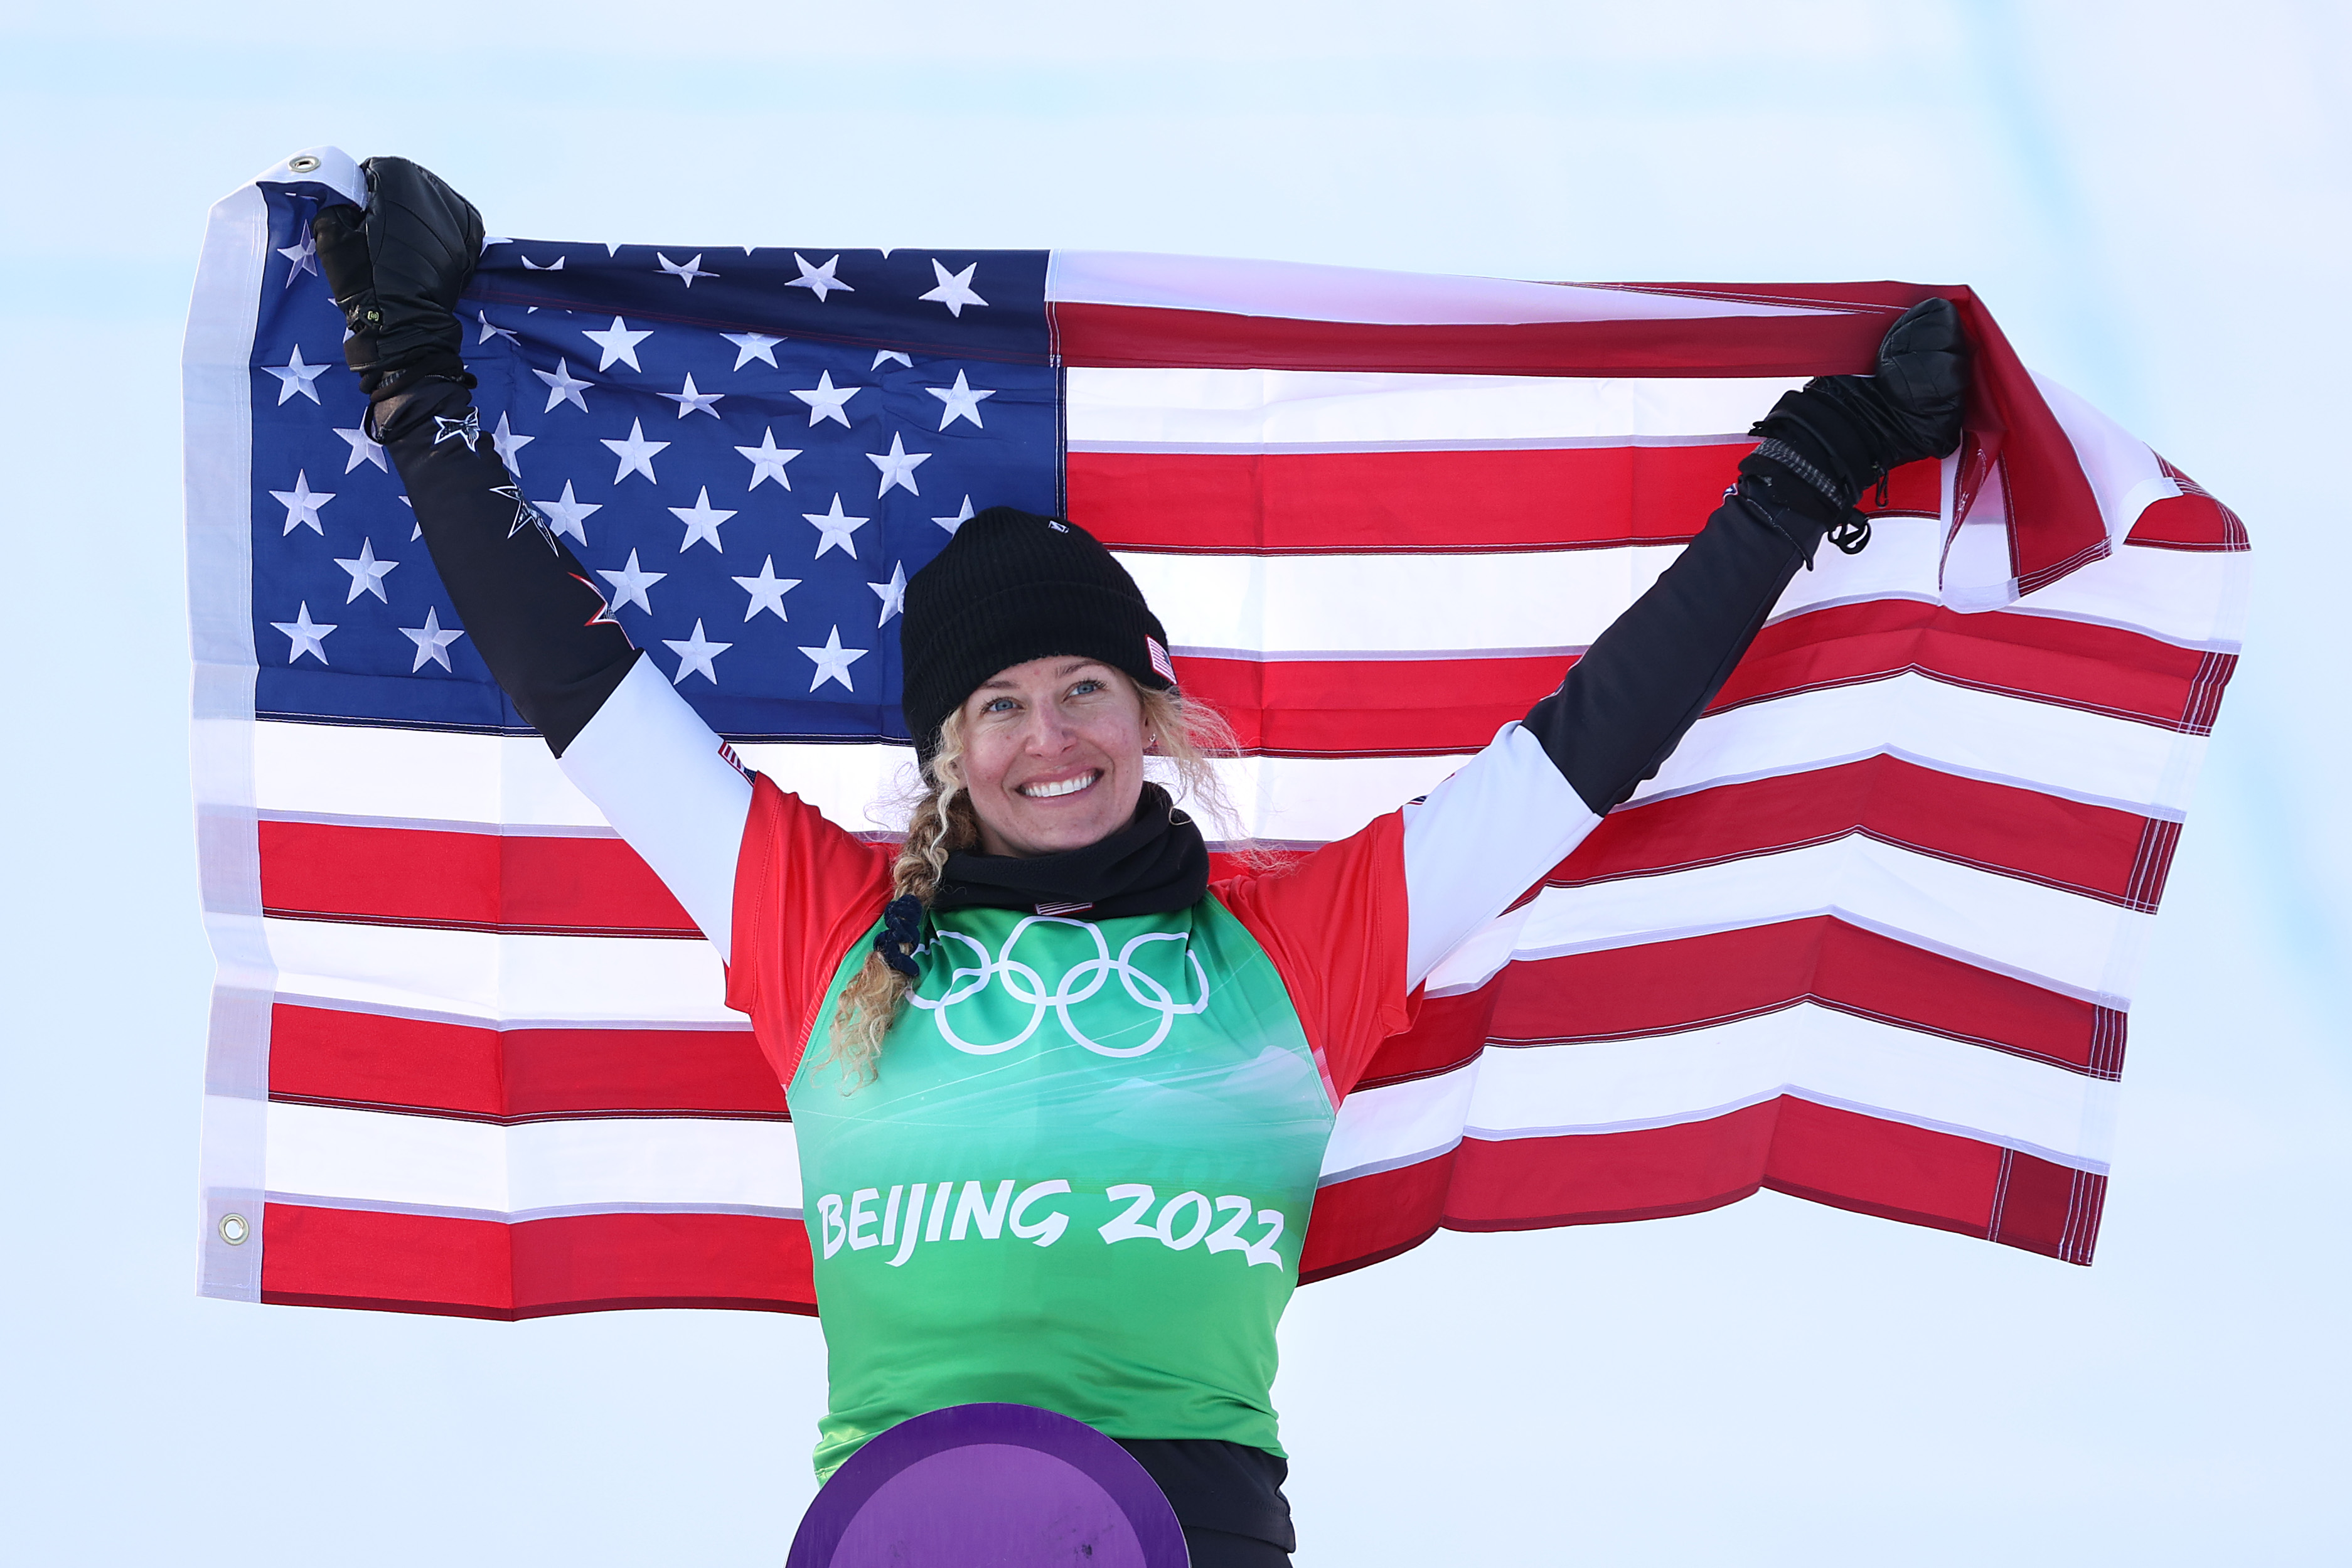 Lindsey Jacobellis won the US' first gold medal of Beijing 2022 in the women's snowboard cross.